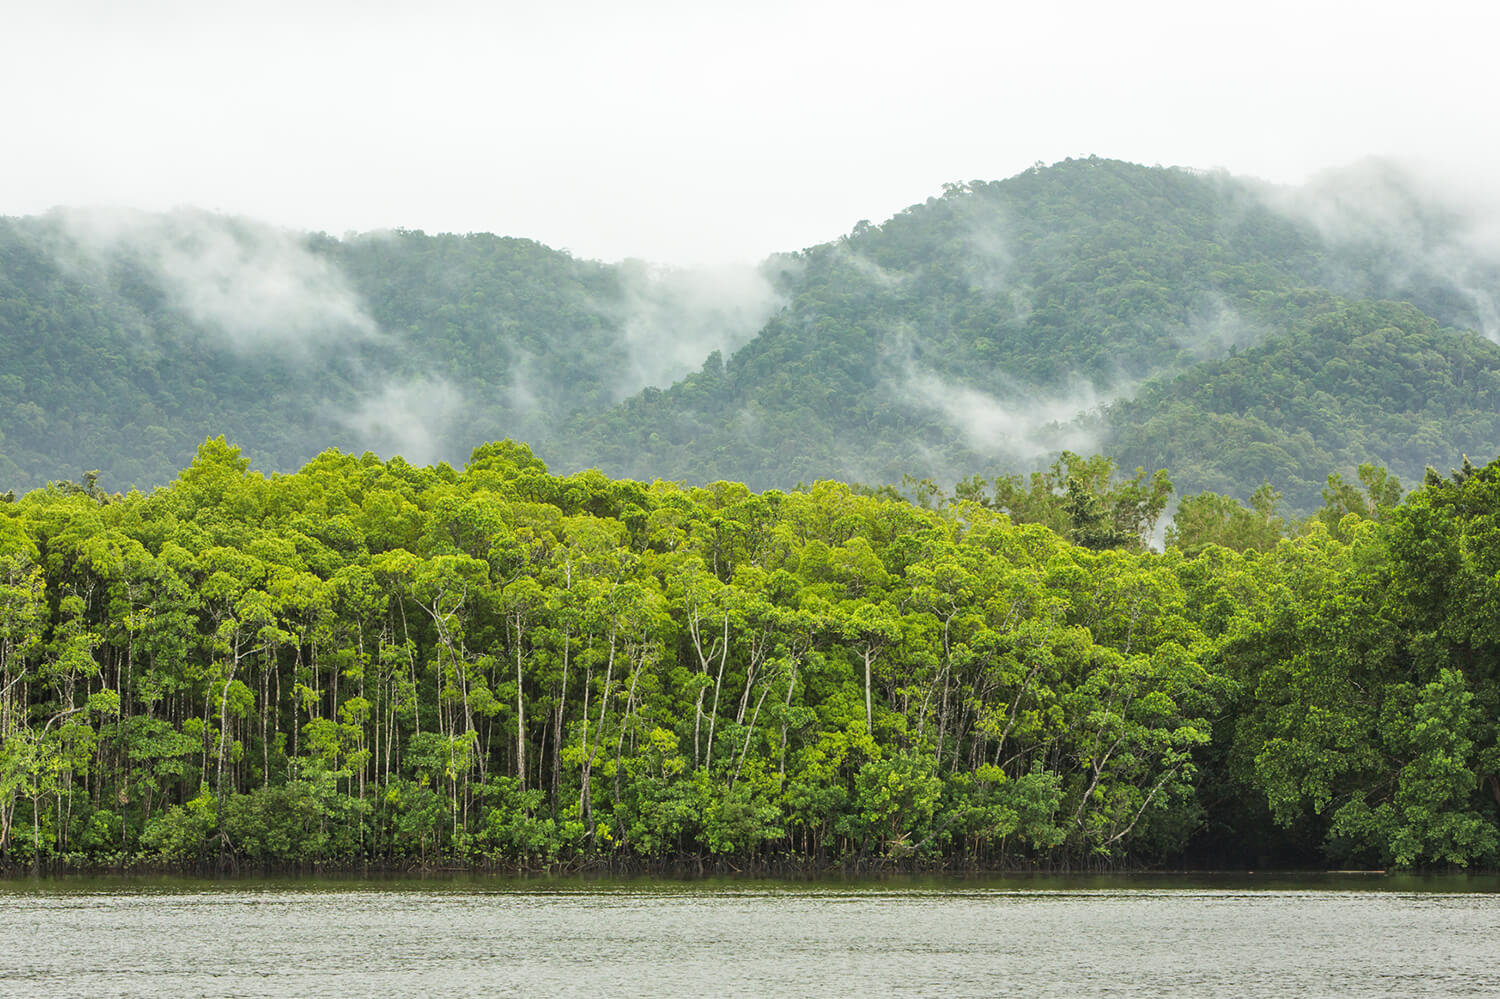 View of Daintree River from Daintree Ferry